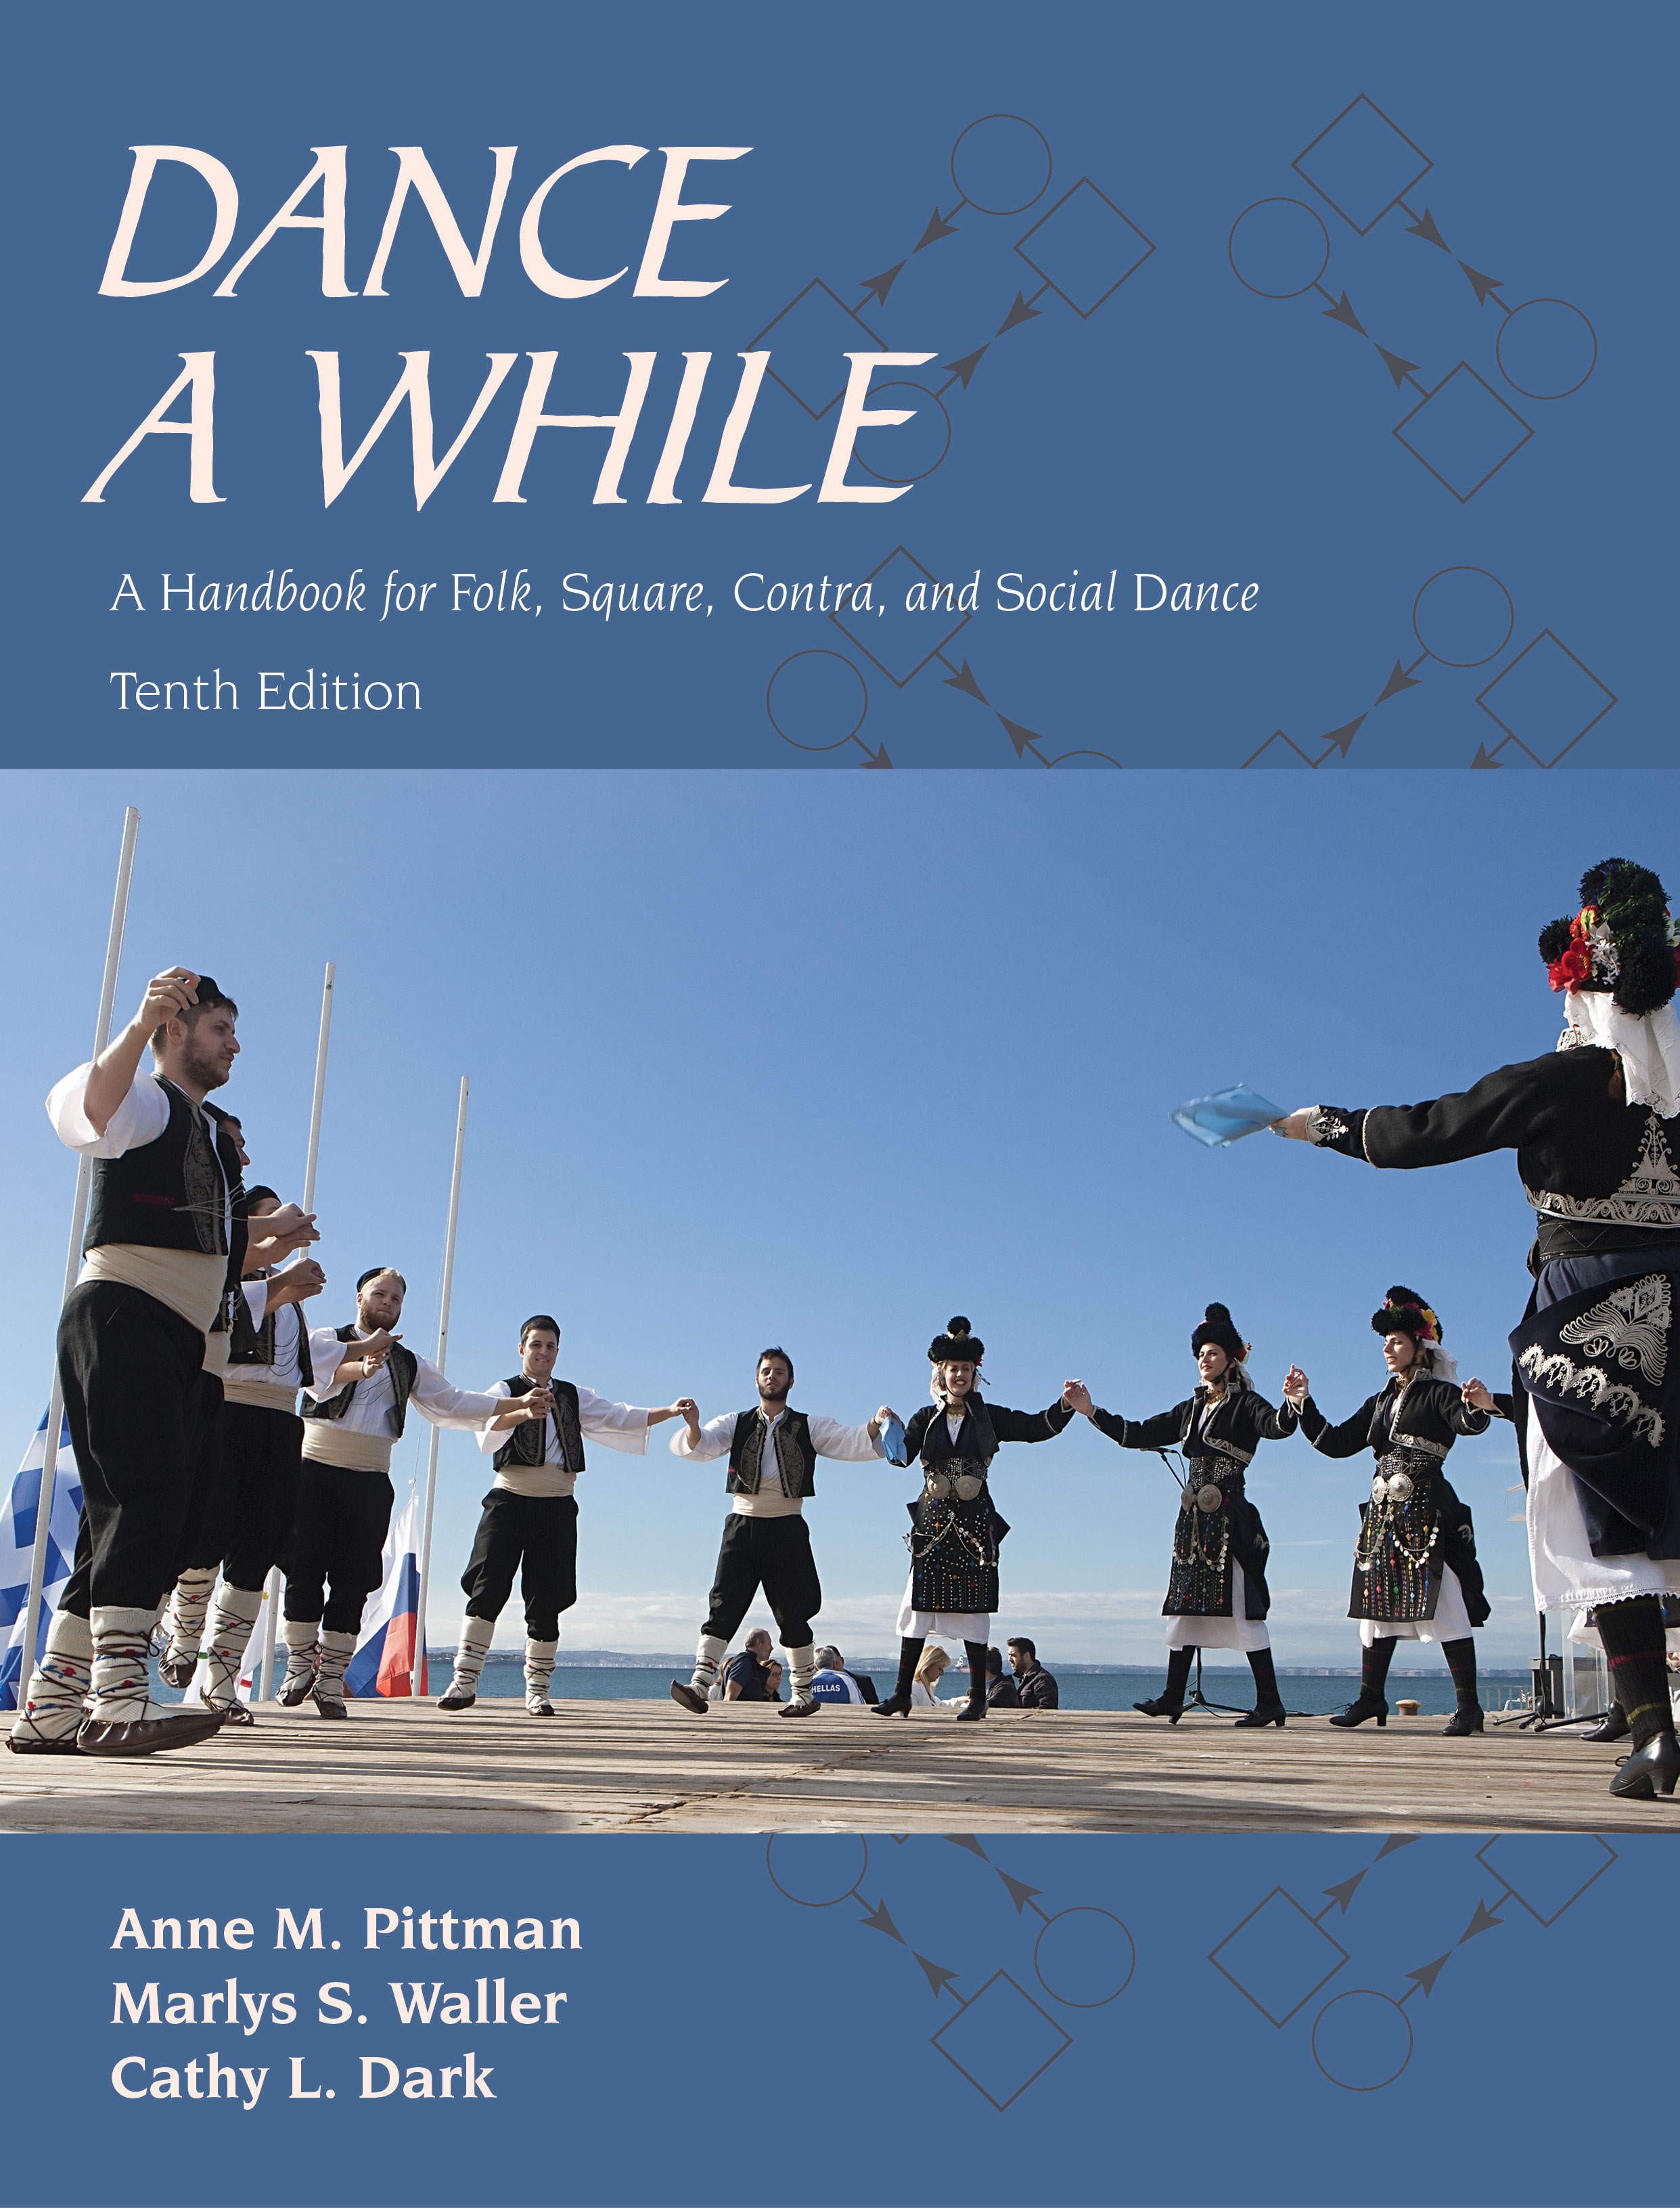 Dance a While: A Handbook for Folk, Square, Contra, and Social Dance, Tenth Edition by Anne M. Pittman, Marlys S. Waller, Cathy L. Dark